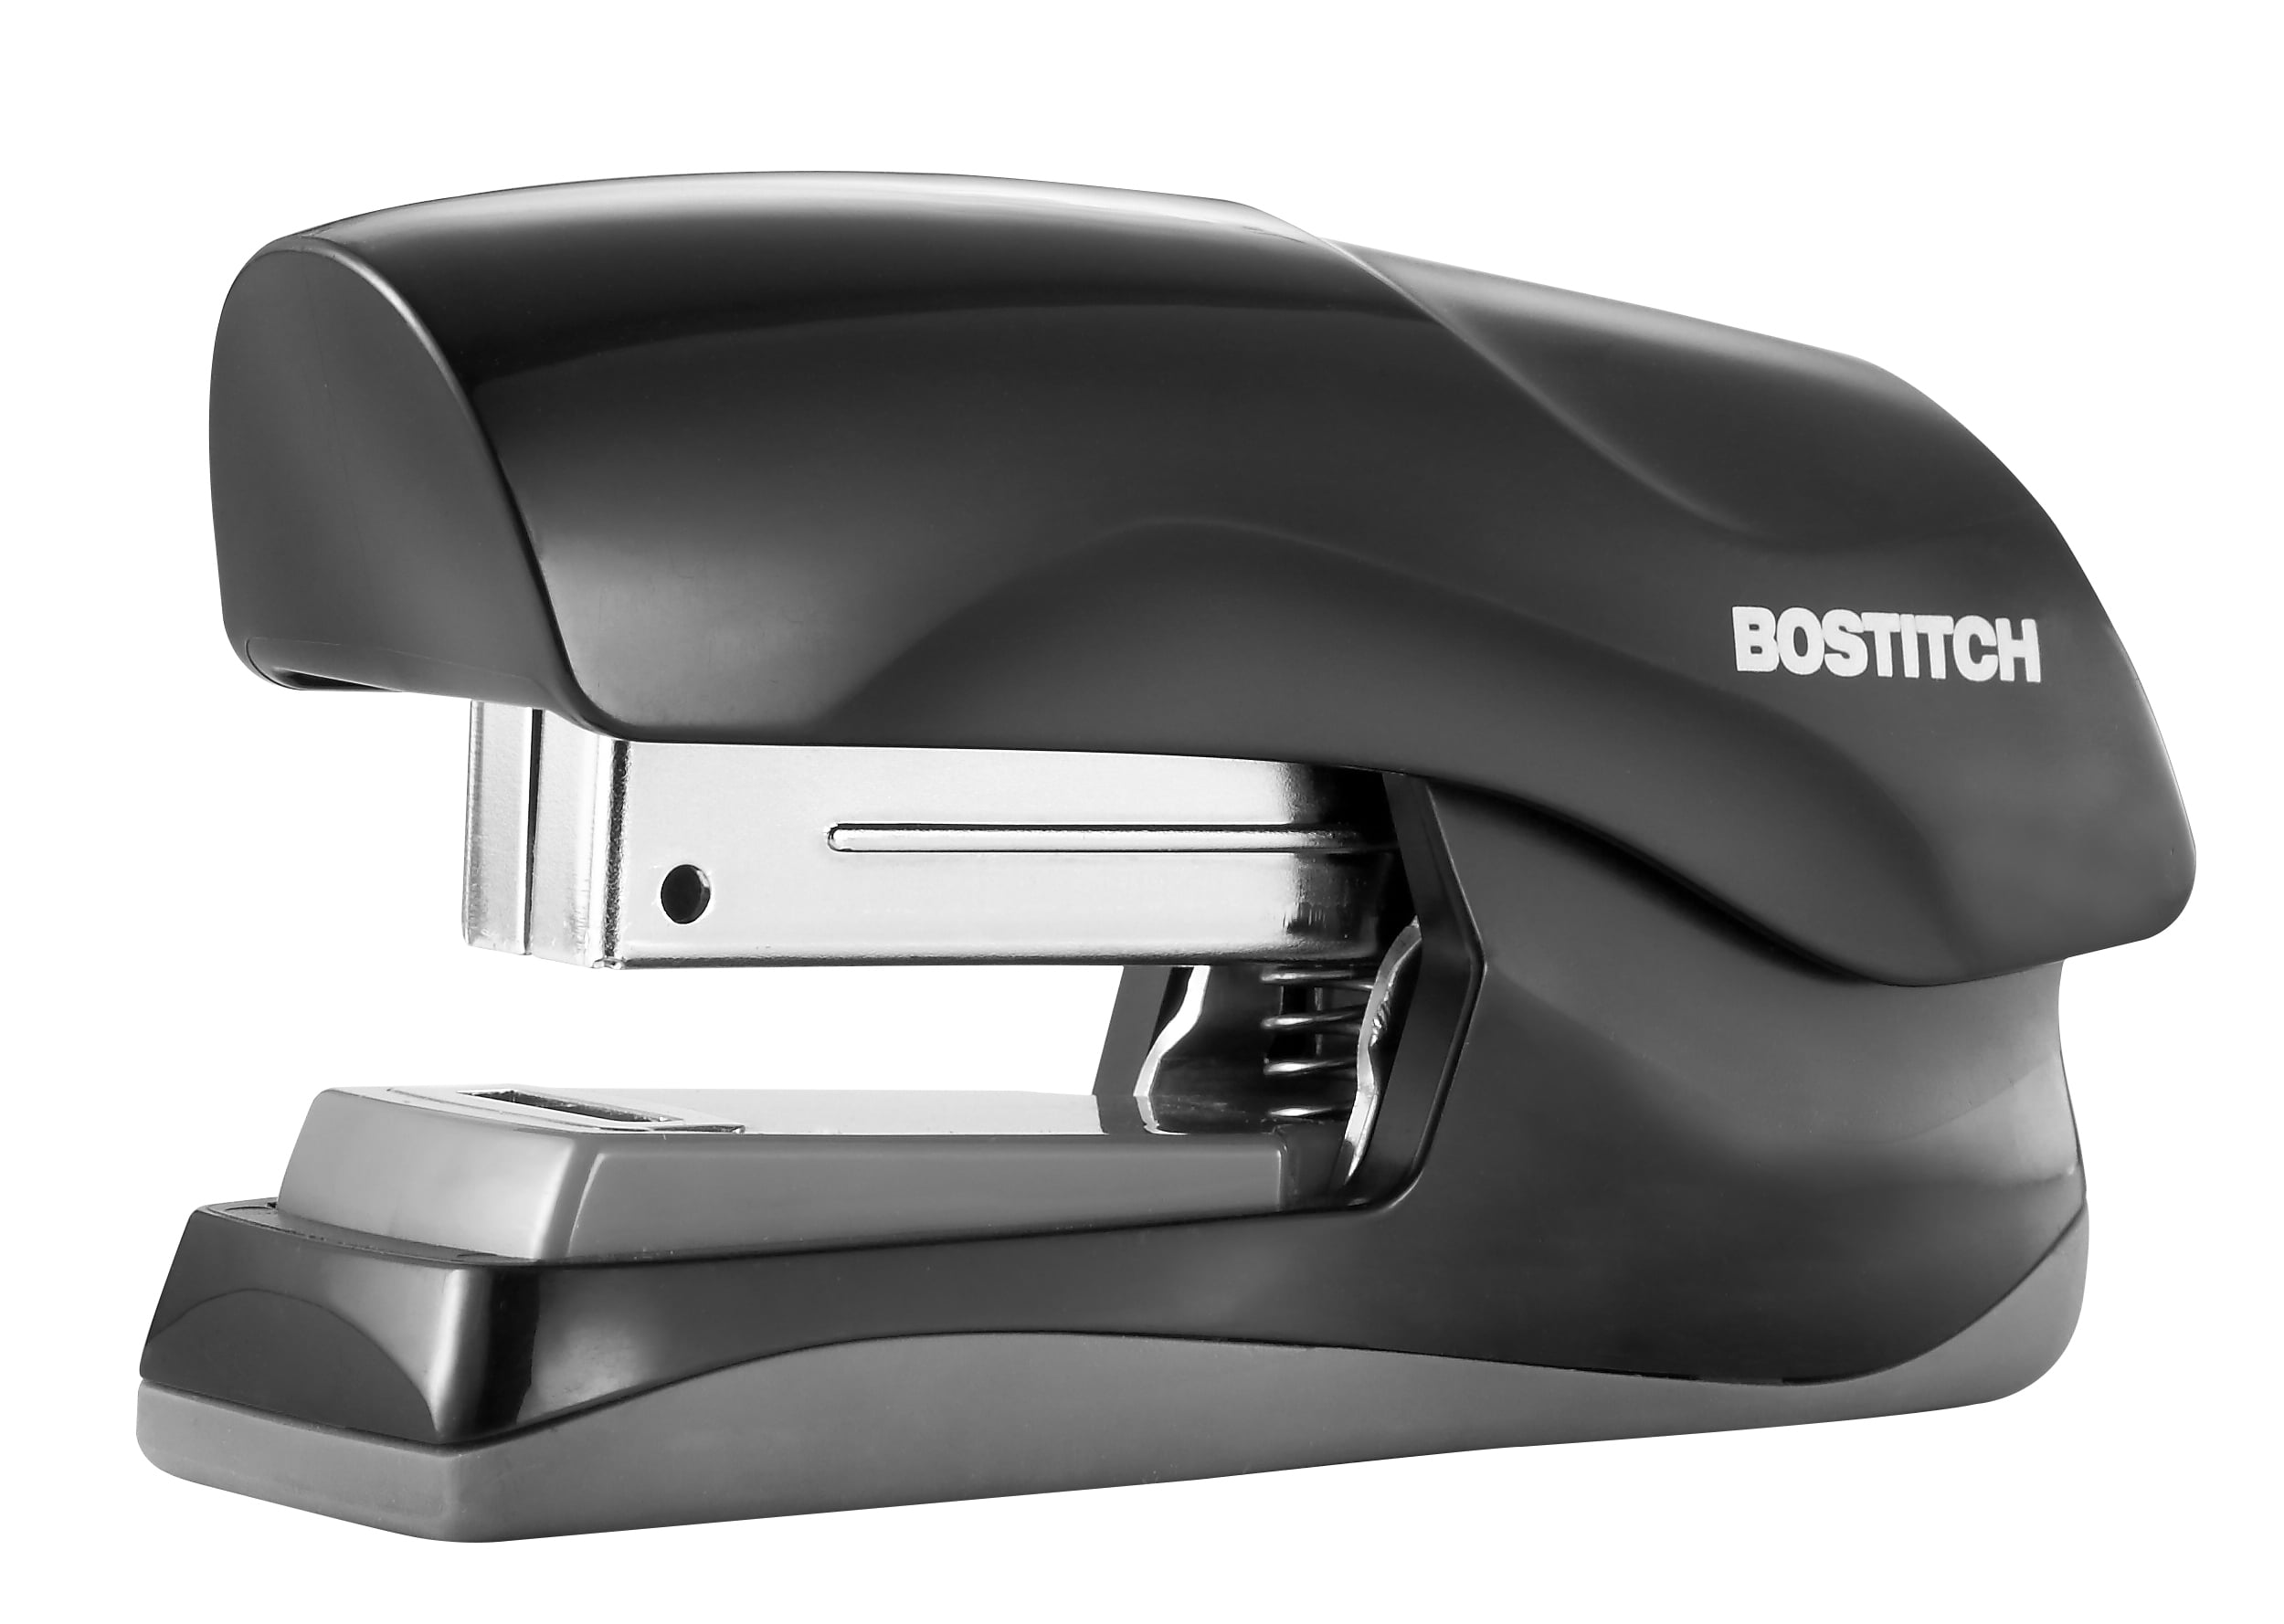 B175-BLK Fits into The Palm of Your Hand; Black Bostitch Office Heavy Duty 40 Sheet Stapler - New Small Stapler Size 